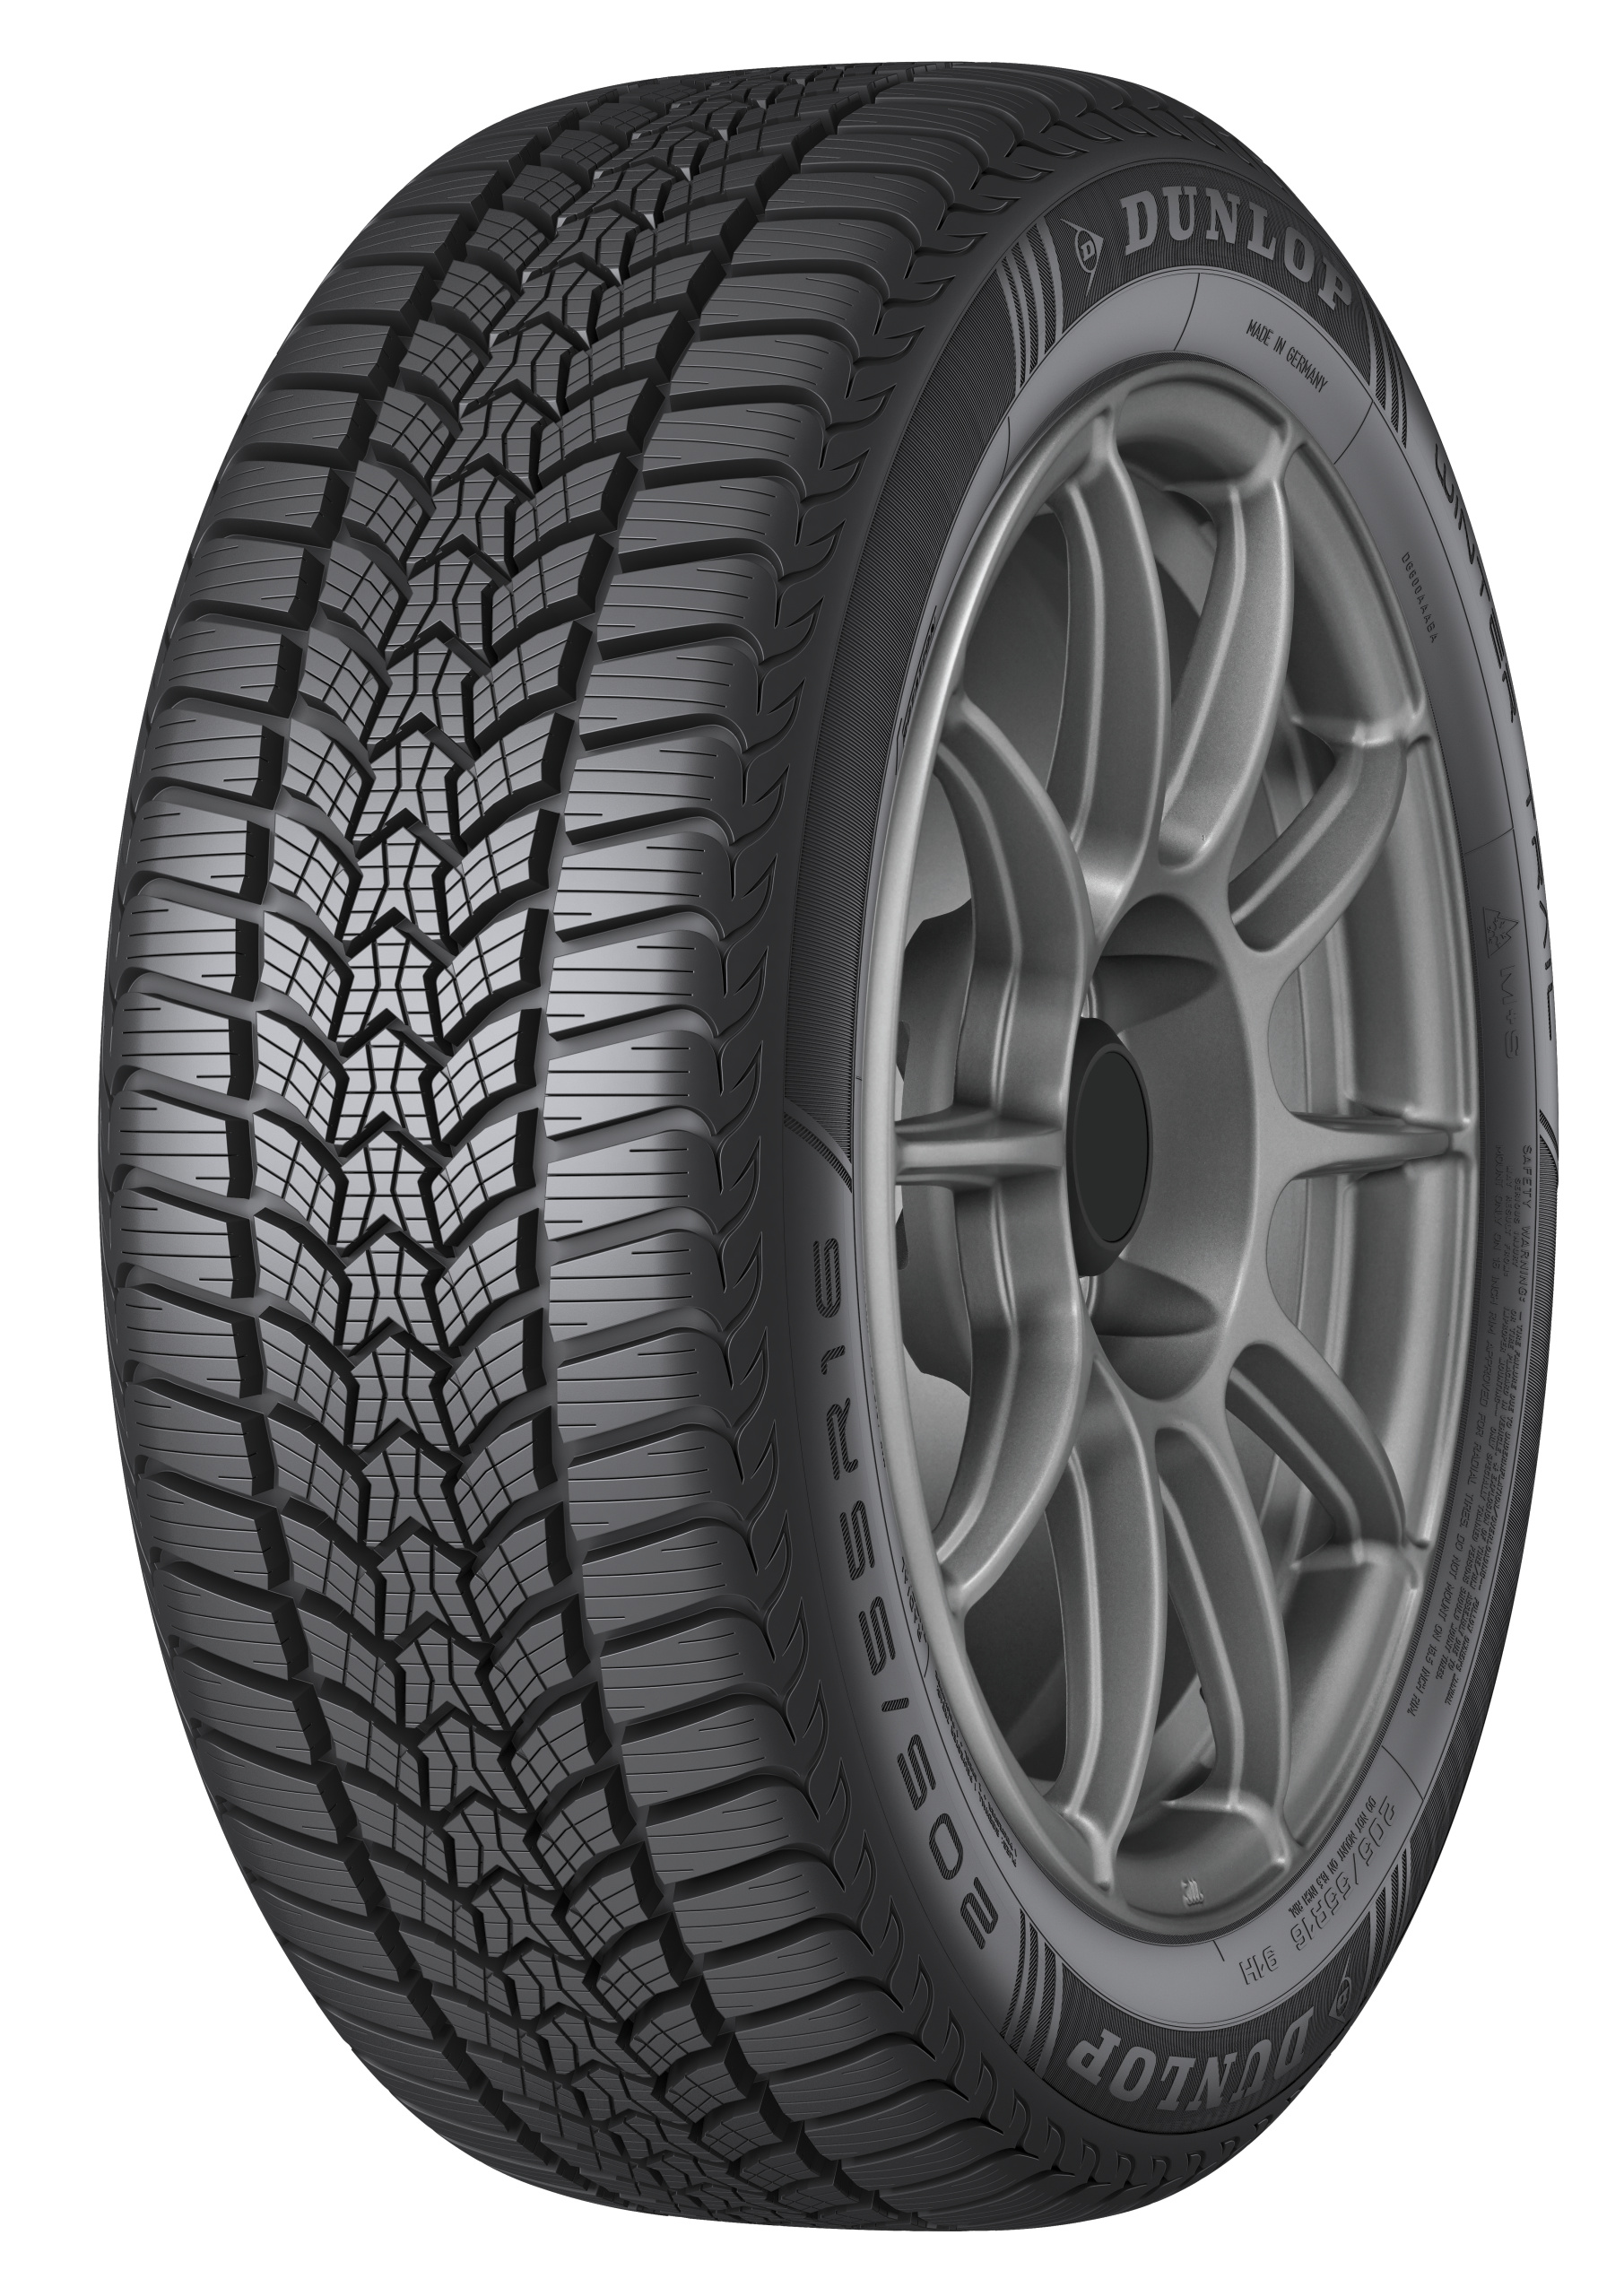 Thumb Dunlop Gomme Nuove Dunlop 175/65 R14 82T WINTER TRAIL M+S pneumatici nuovi Invernale_0